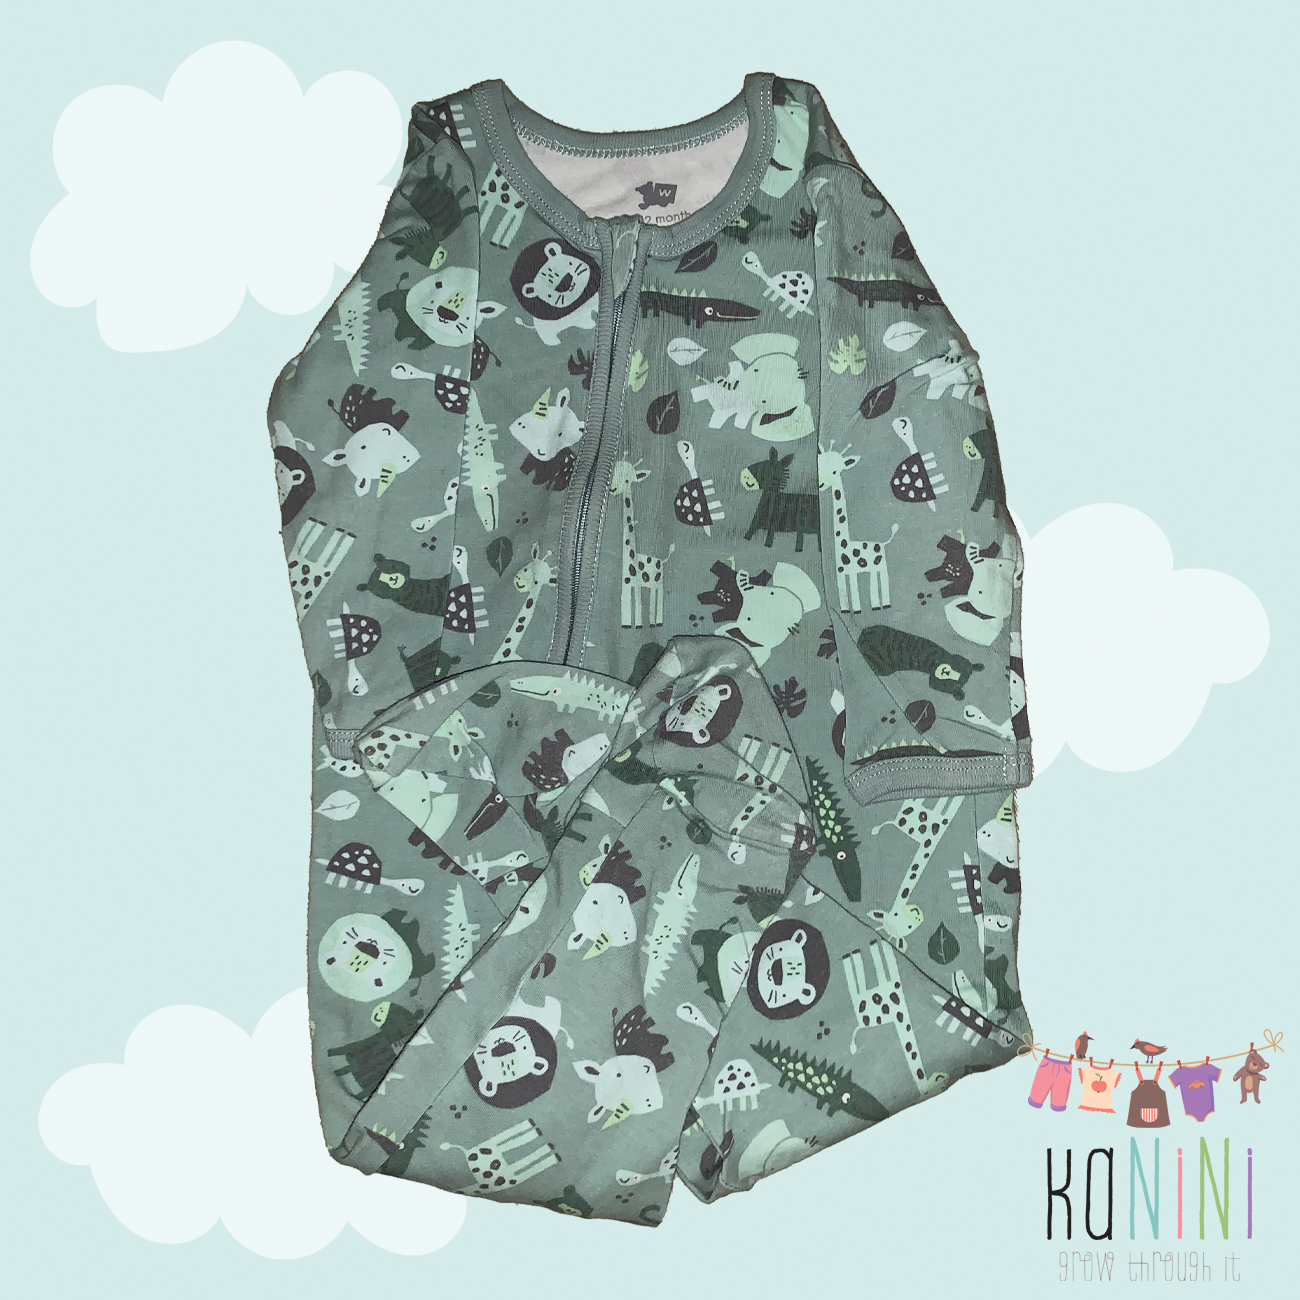 Featured image for “Woolworths 6 - 12 Months Boys Jungle Babygrow”